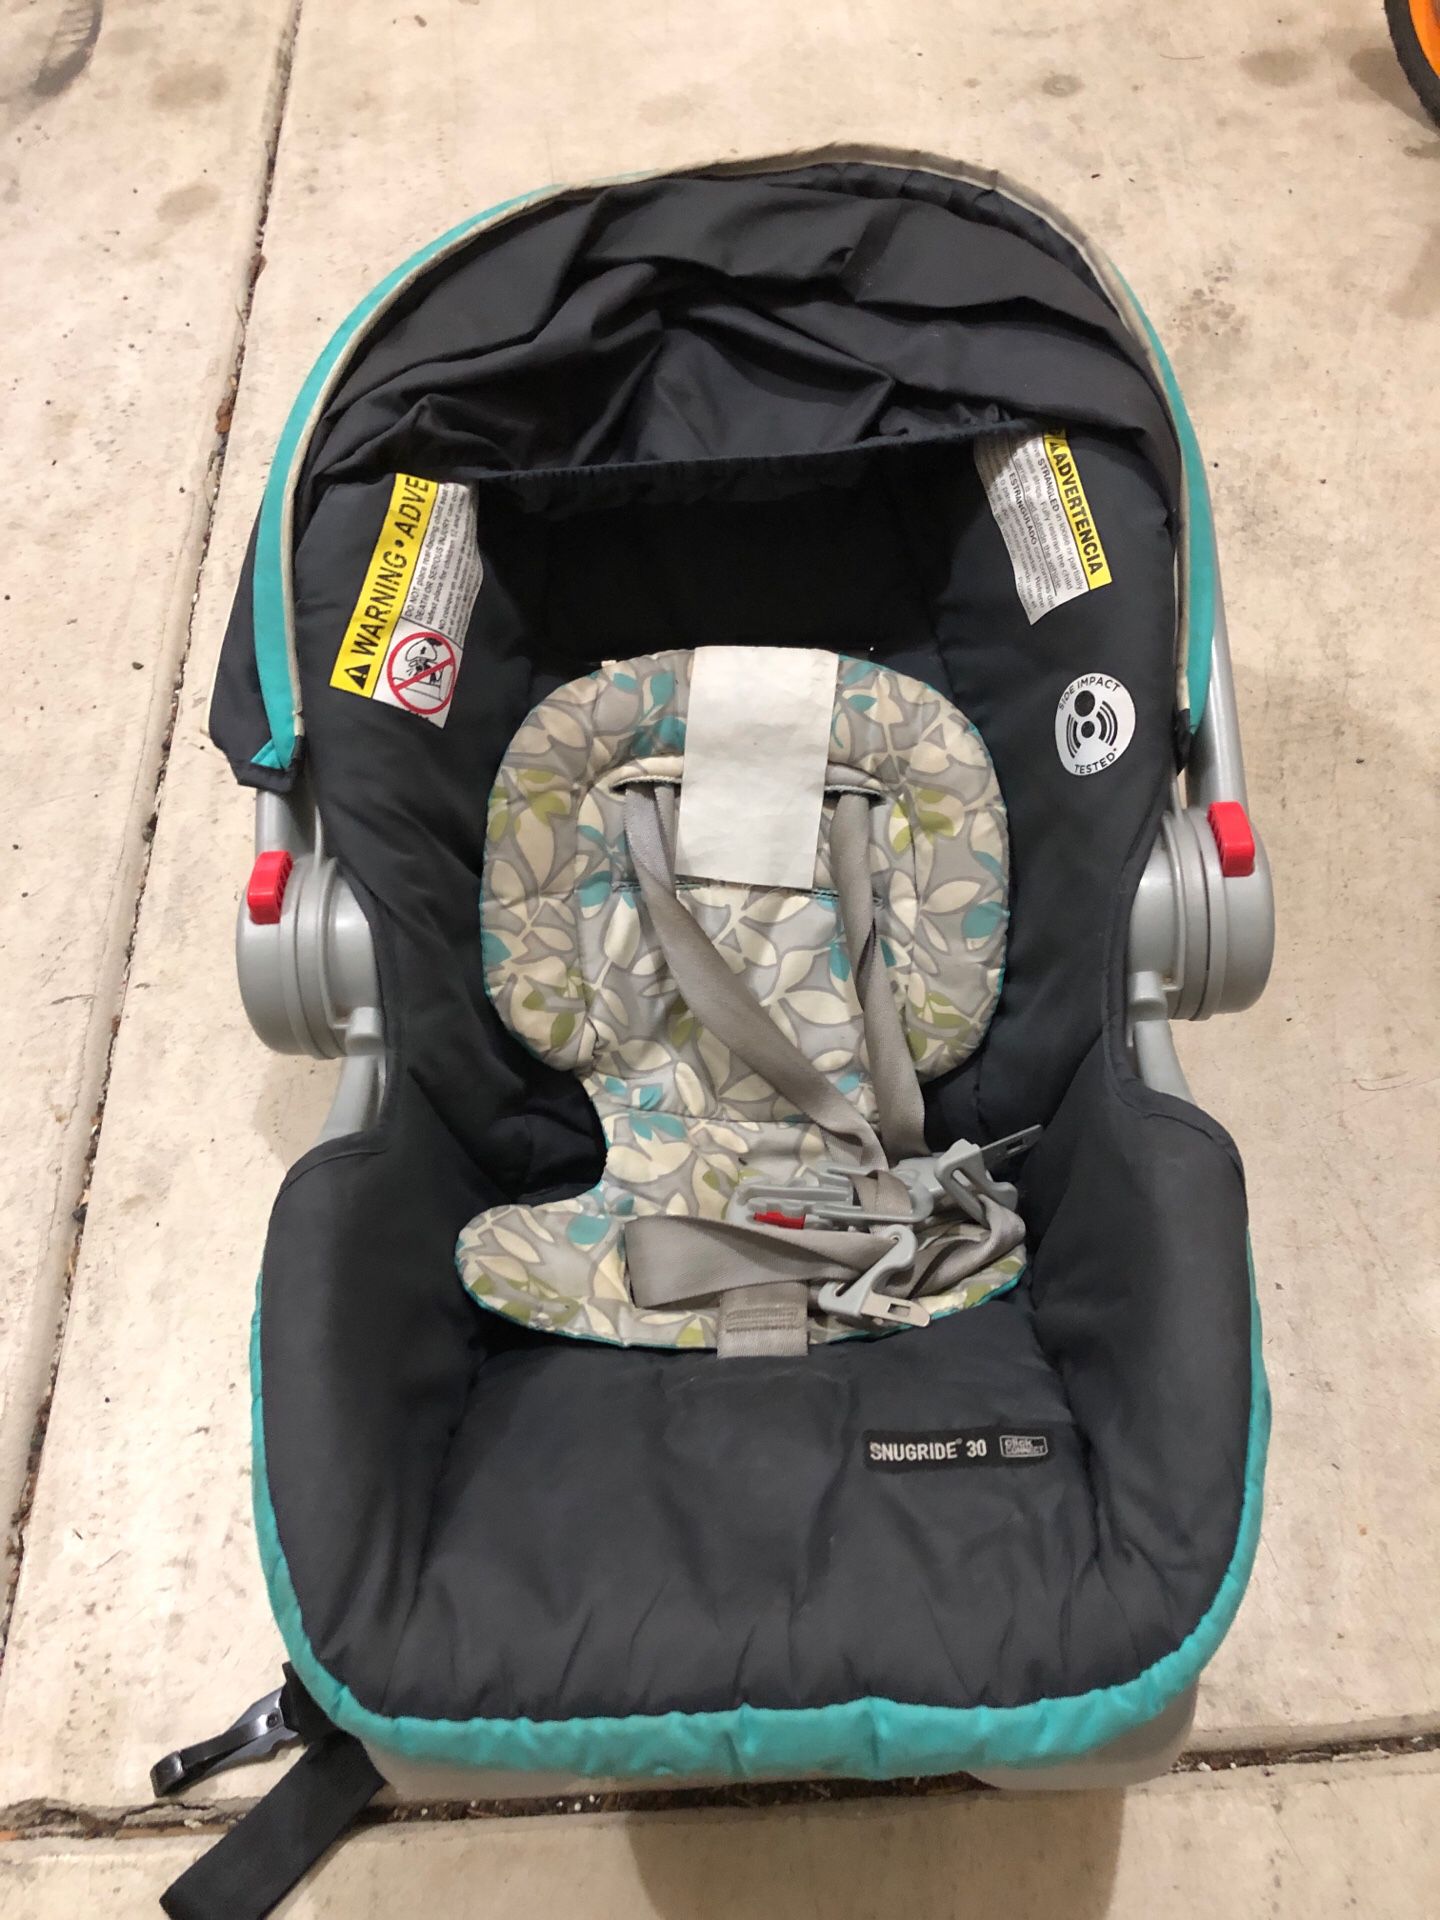 Graco car seat - Ready for pickup